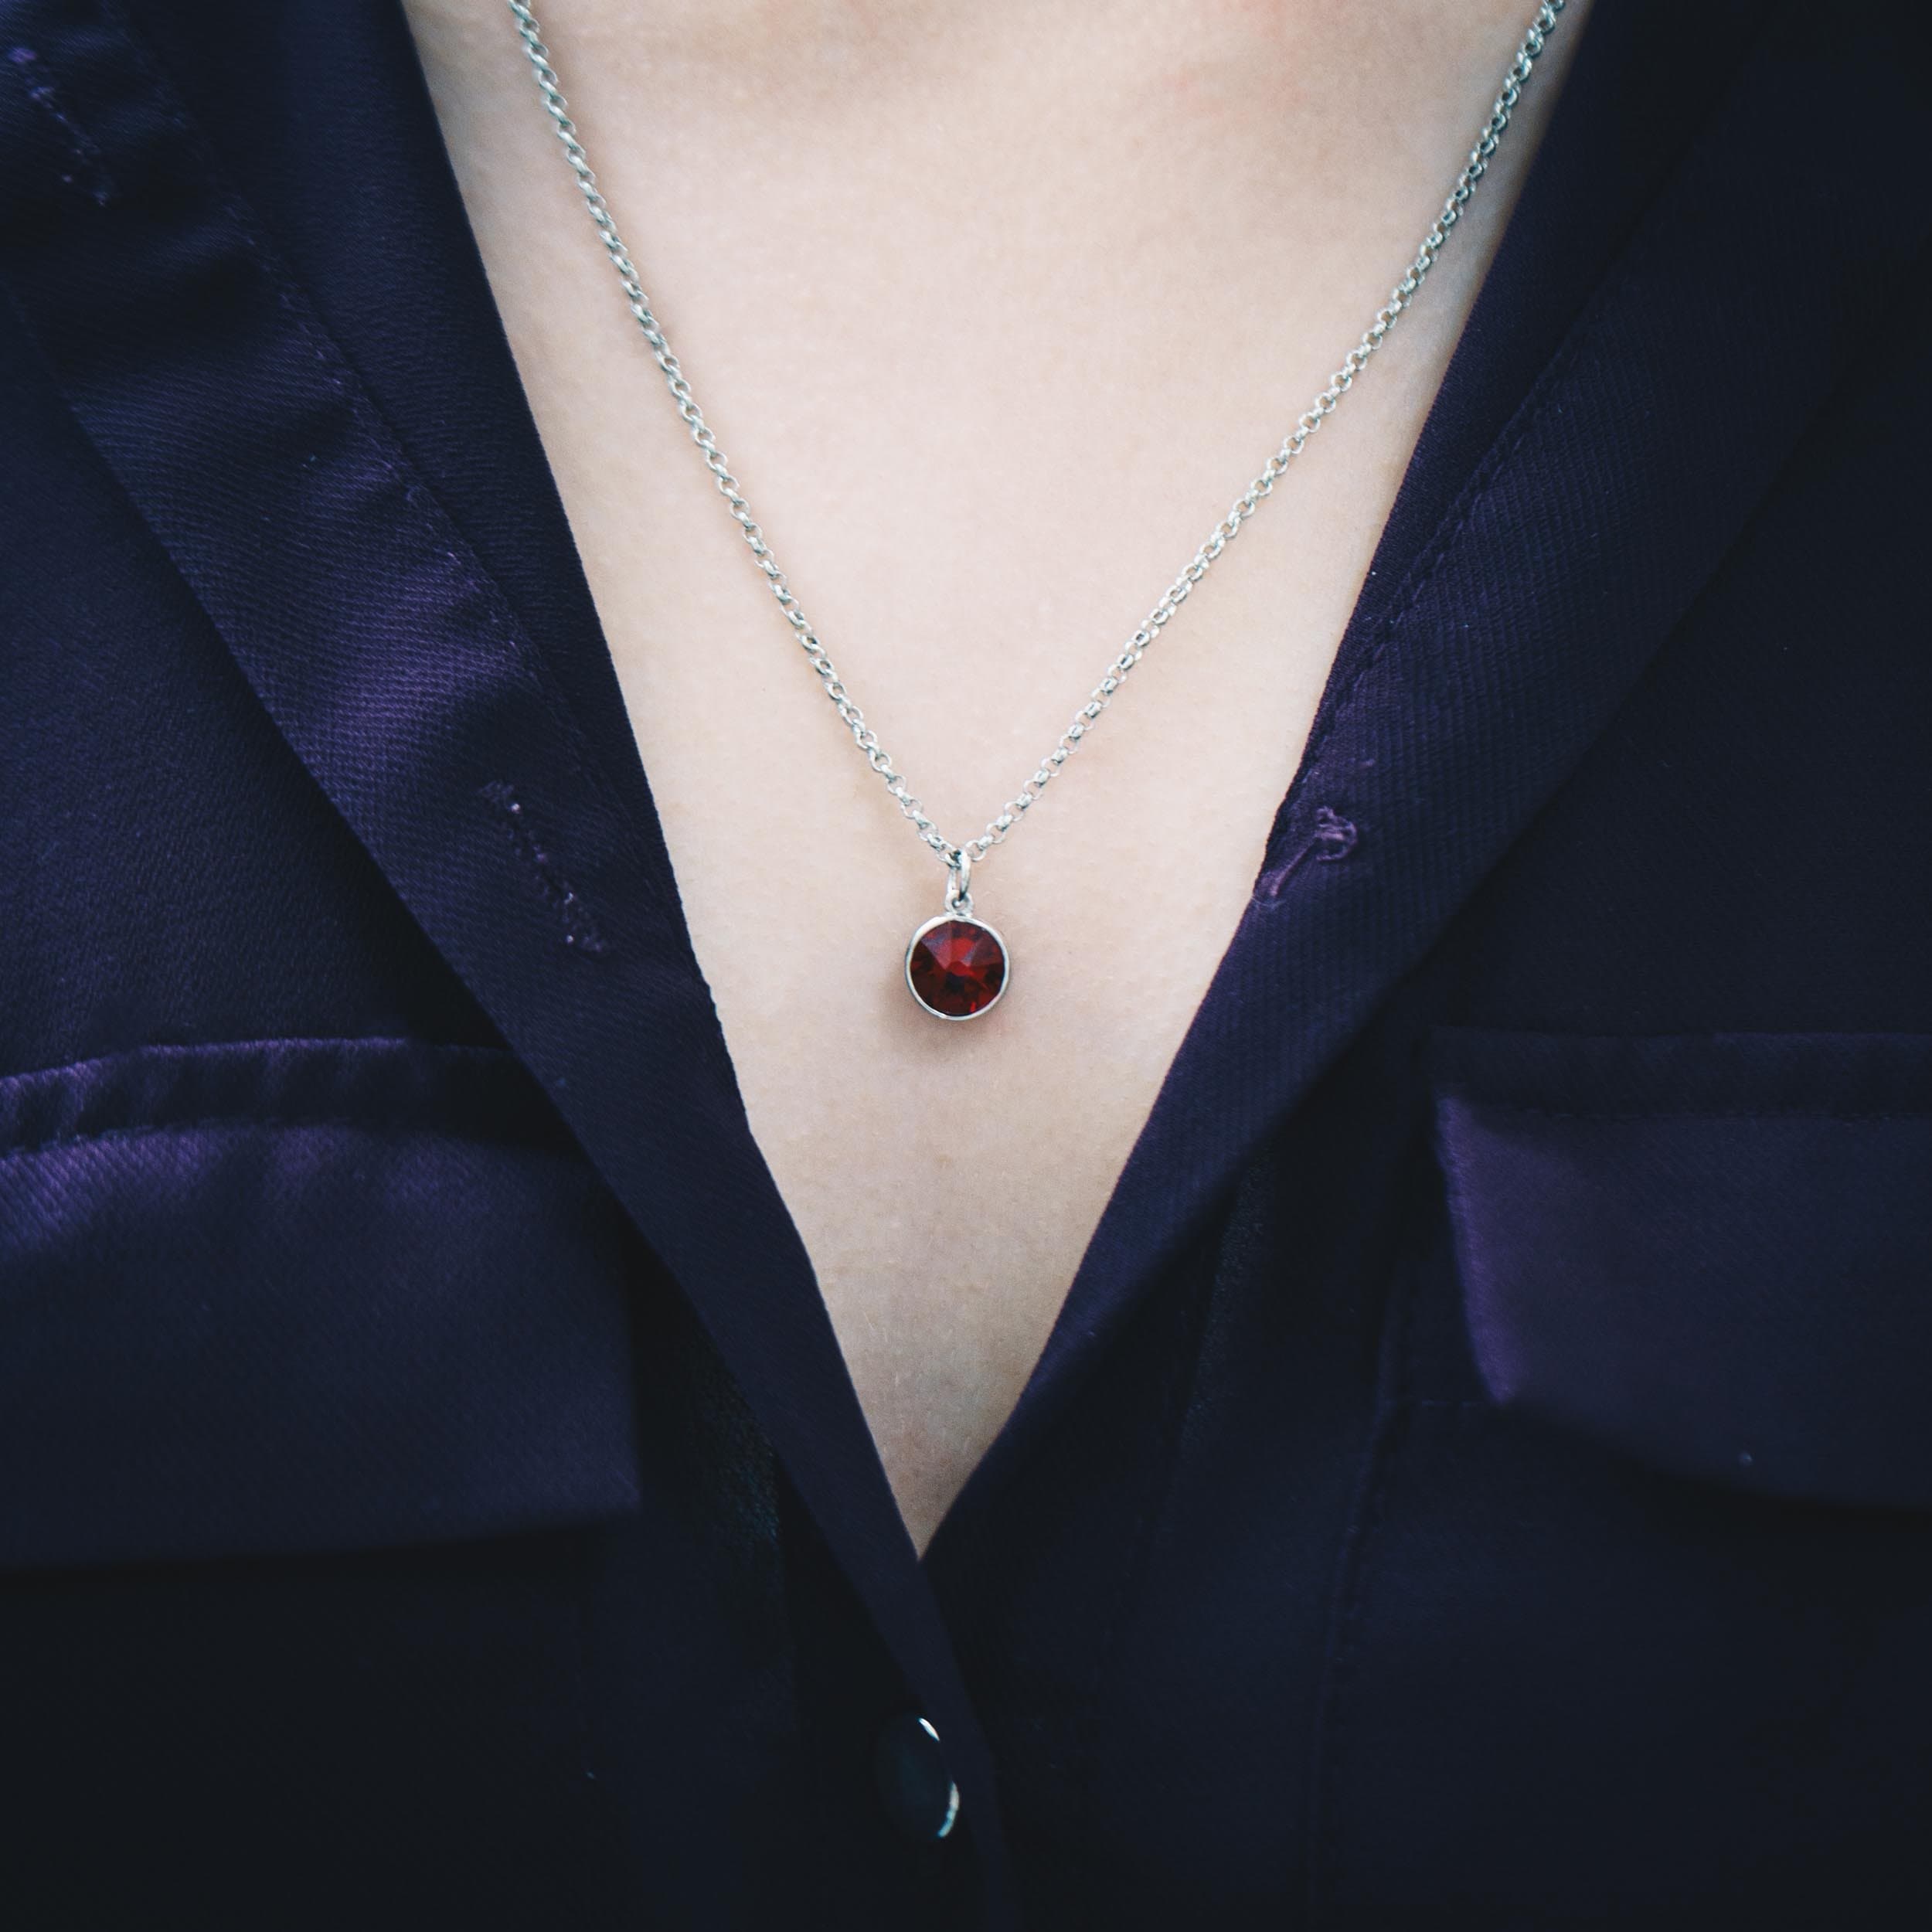 July (Ruby) Birthstone Necklace Created with Zircondia® Crystals